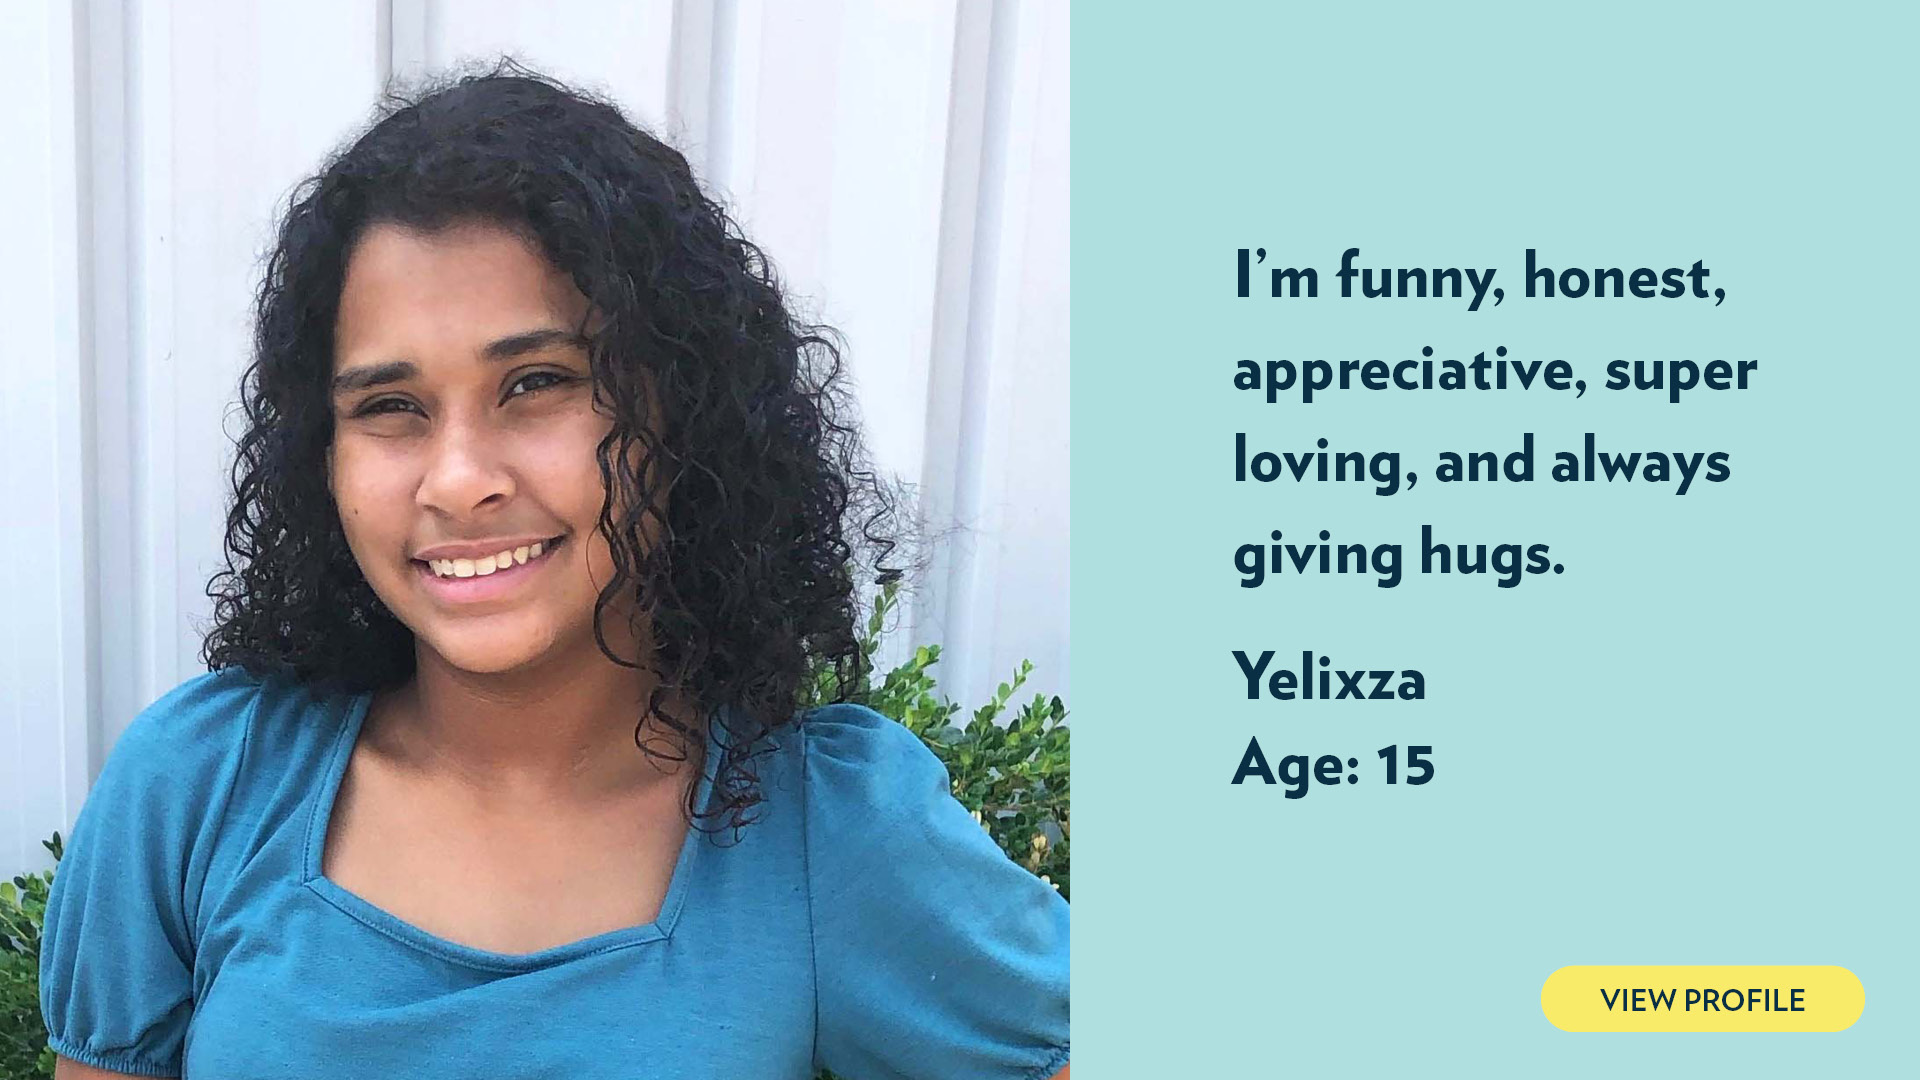 Yelixza, age 15. I’m funny, honest, appreciative, super loving, and always giving hugs. View profile.